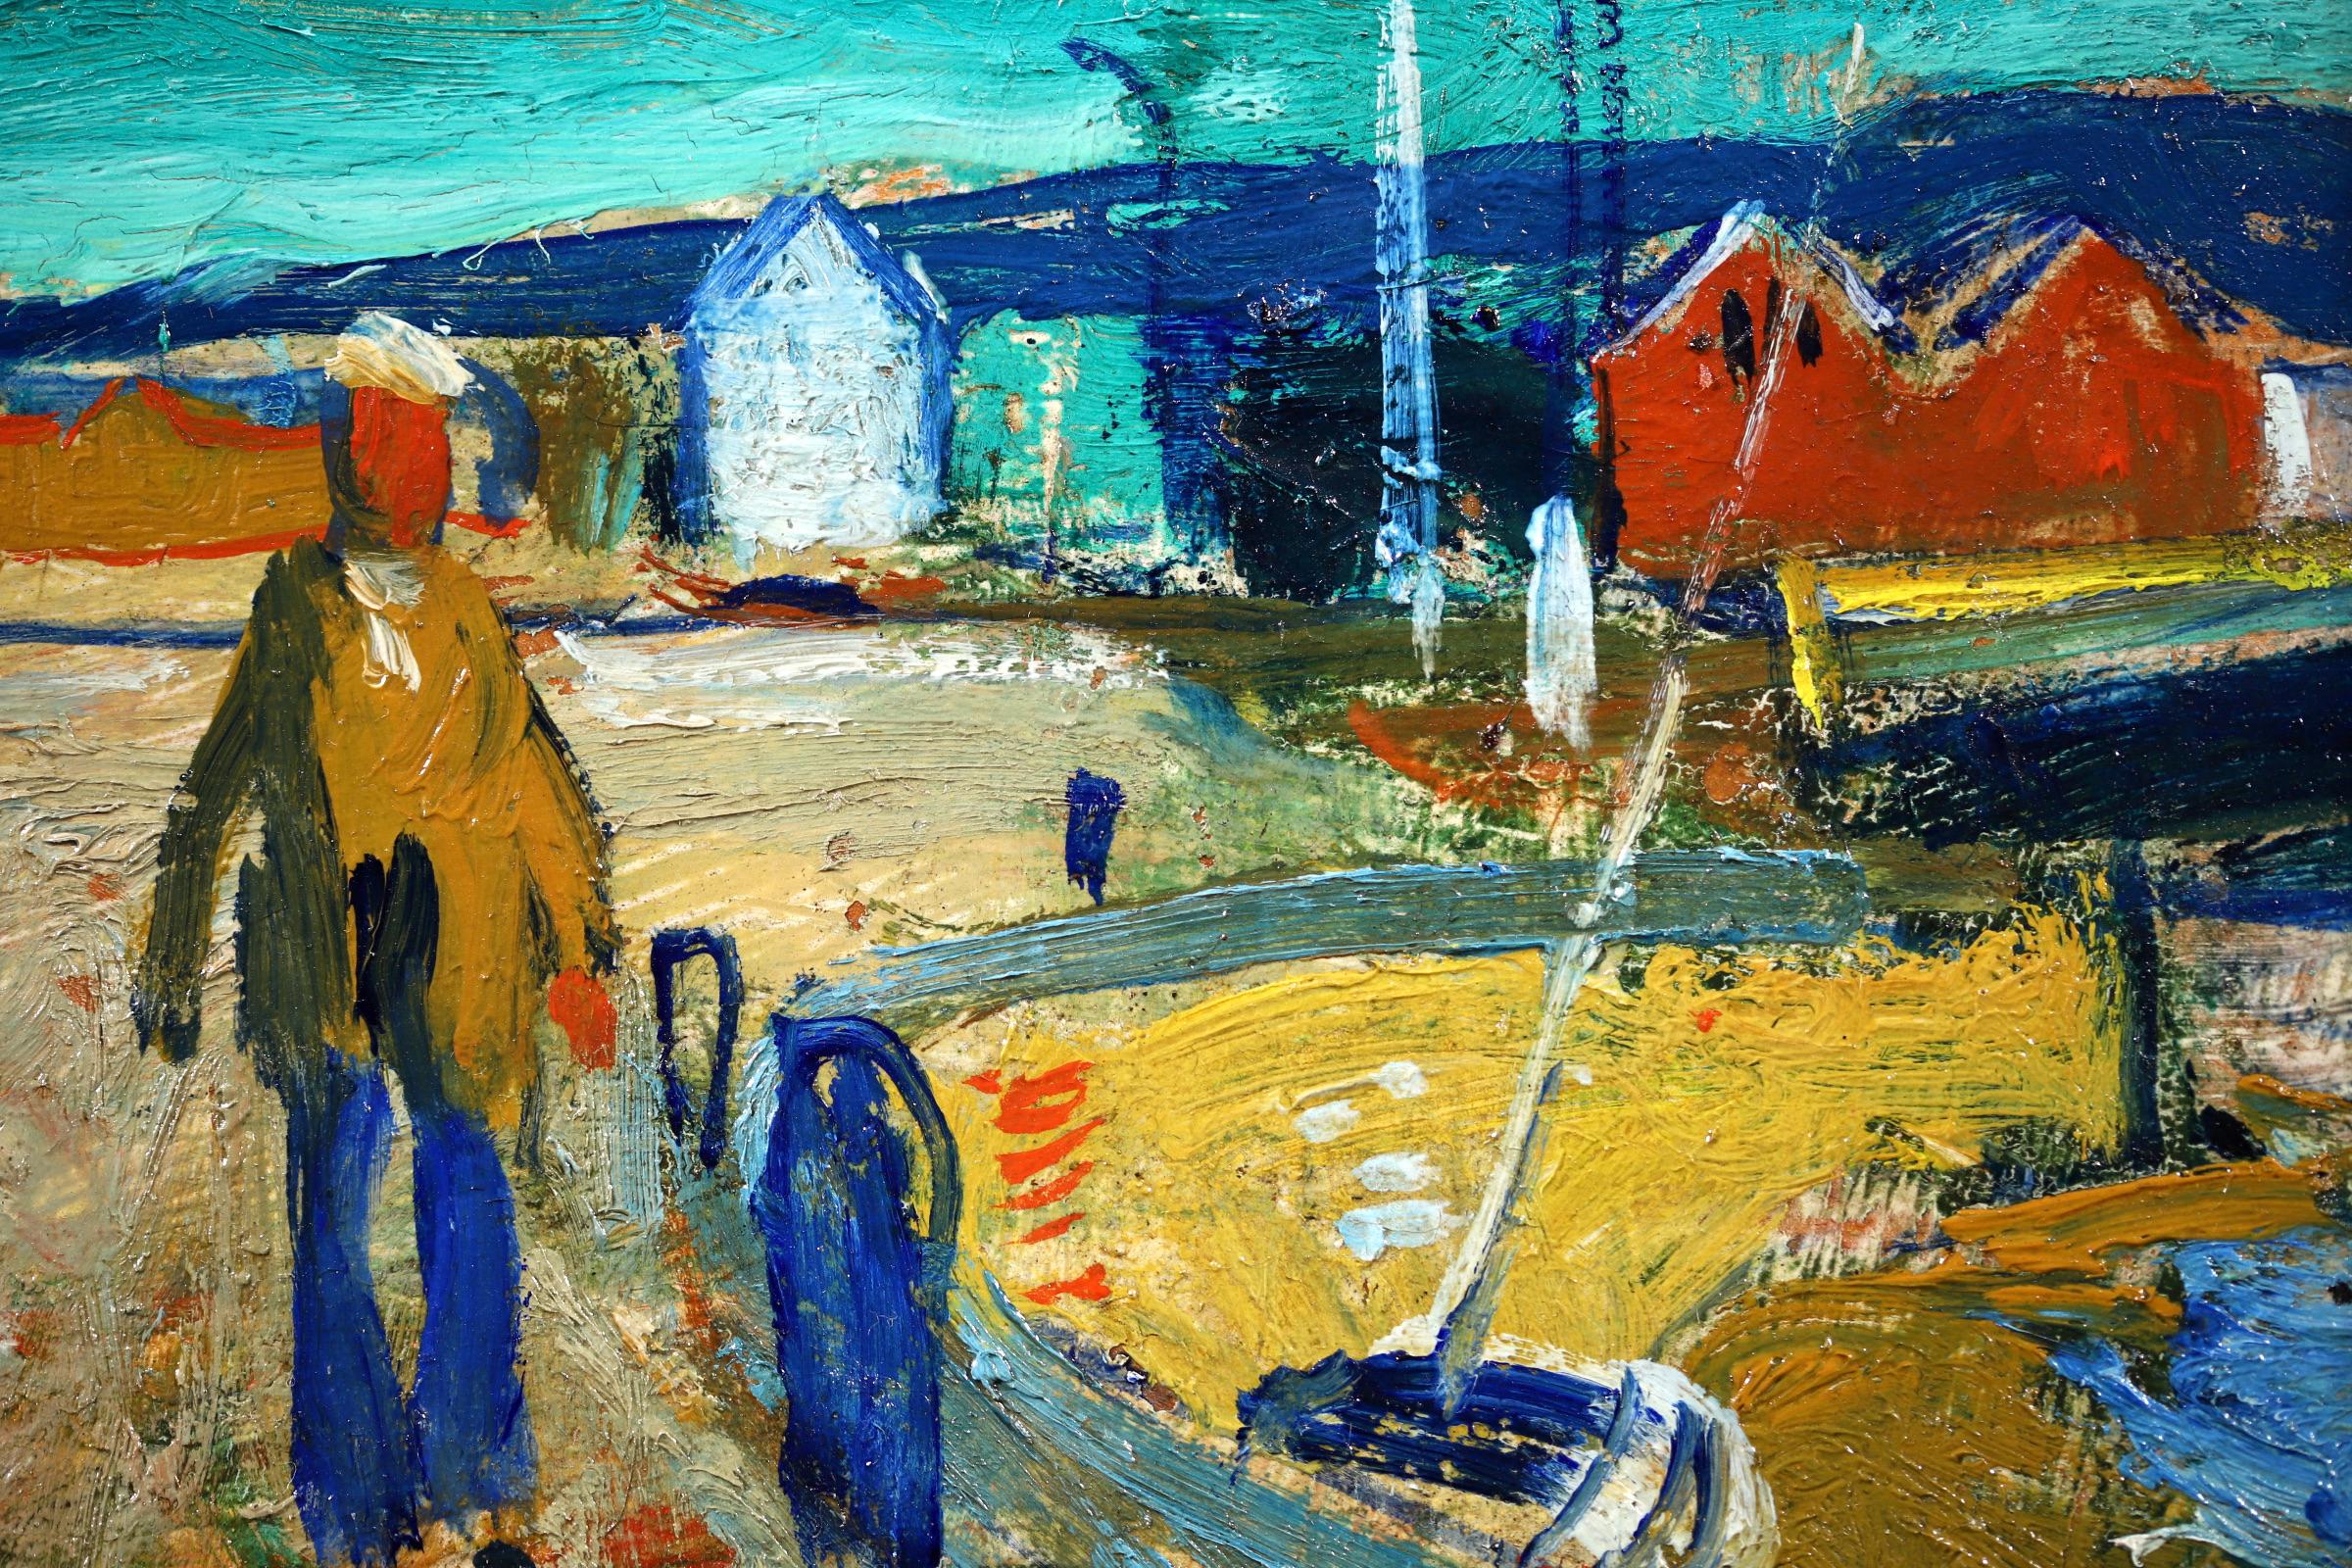 Harbour - Camaret - Post Impressionist Oil Figure in Landscape by Francois Gall - Brown Figurative Painting by François Gall